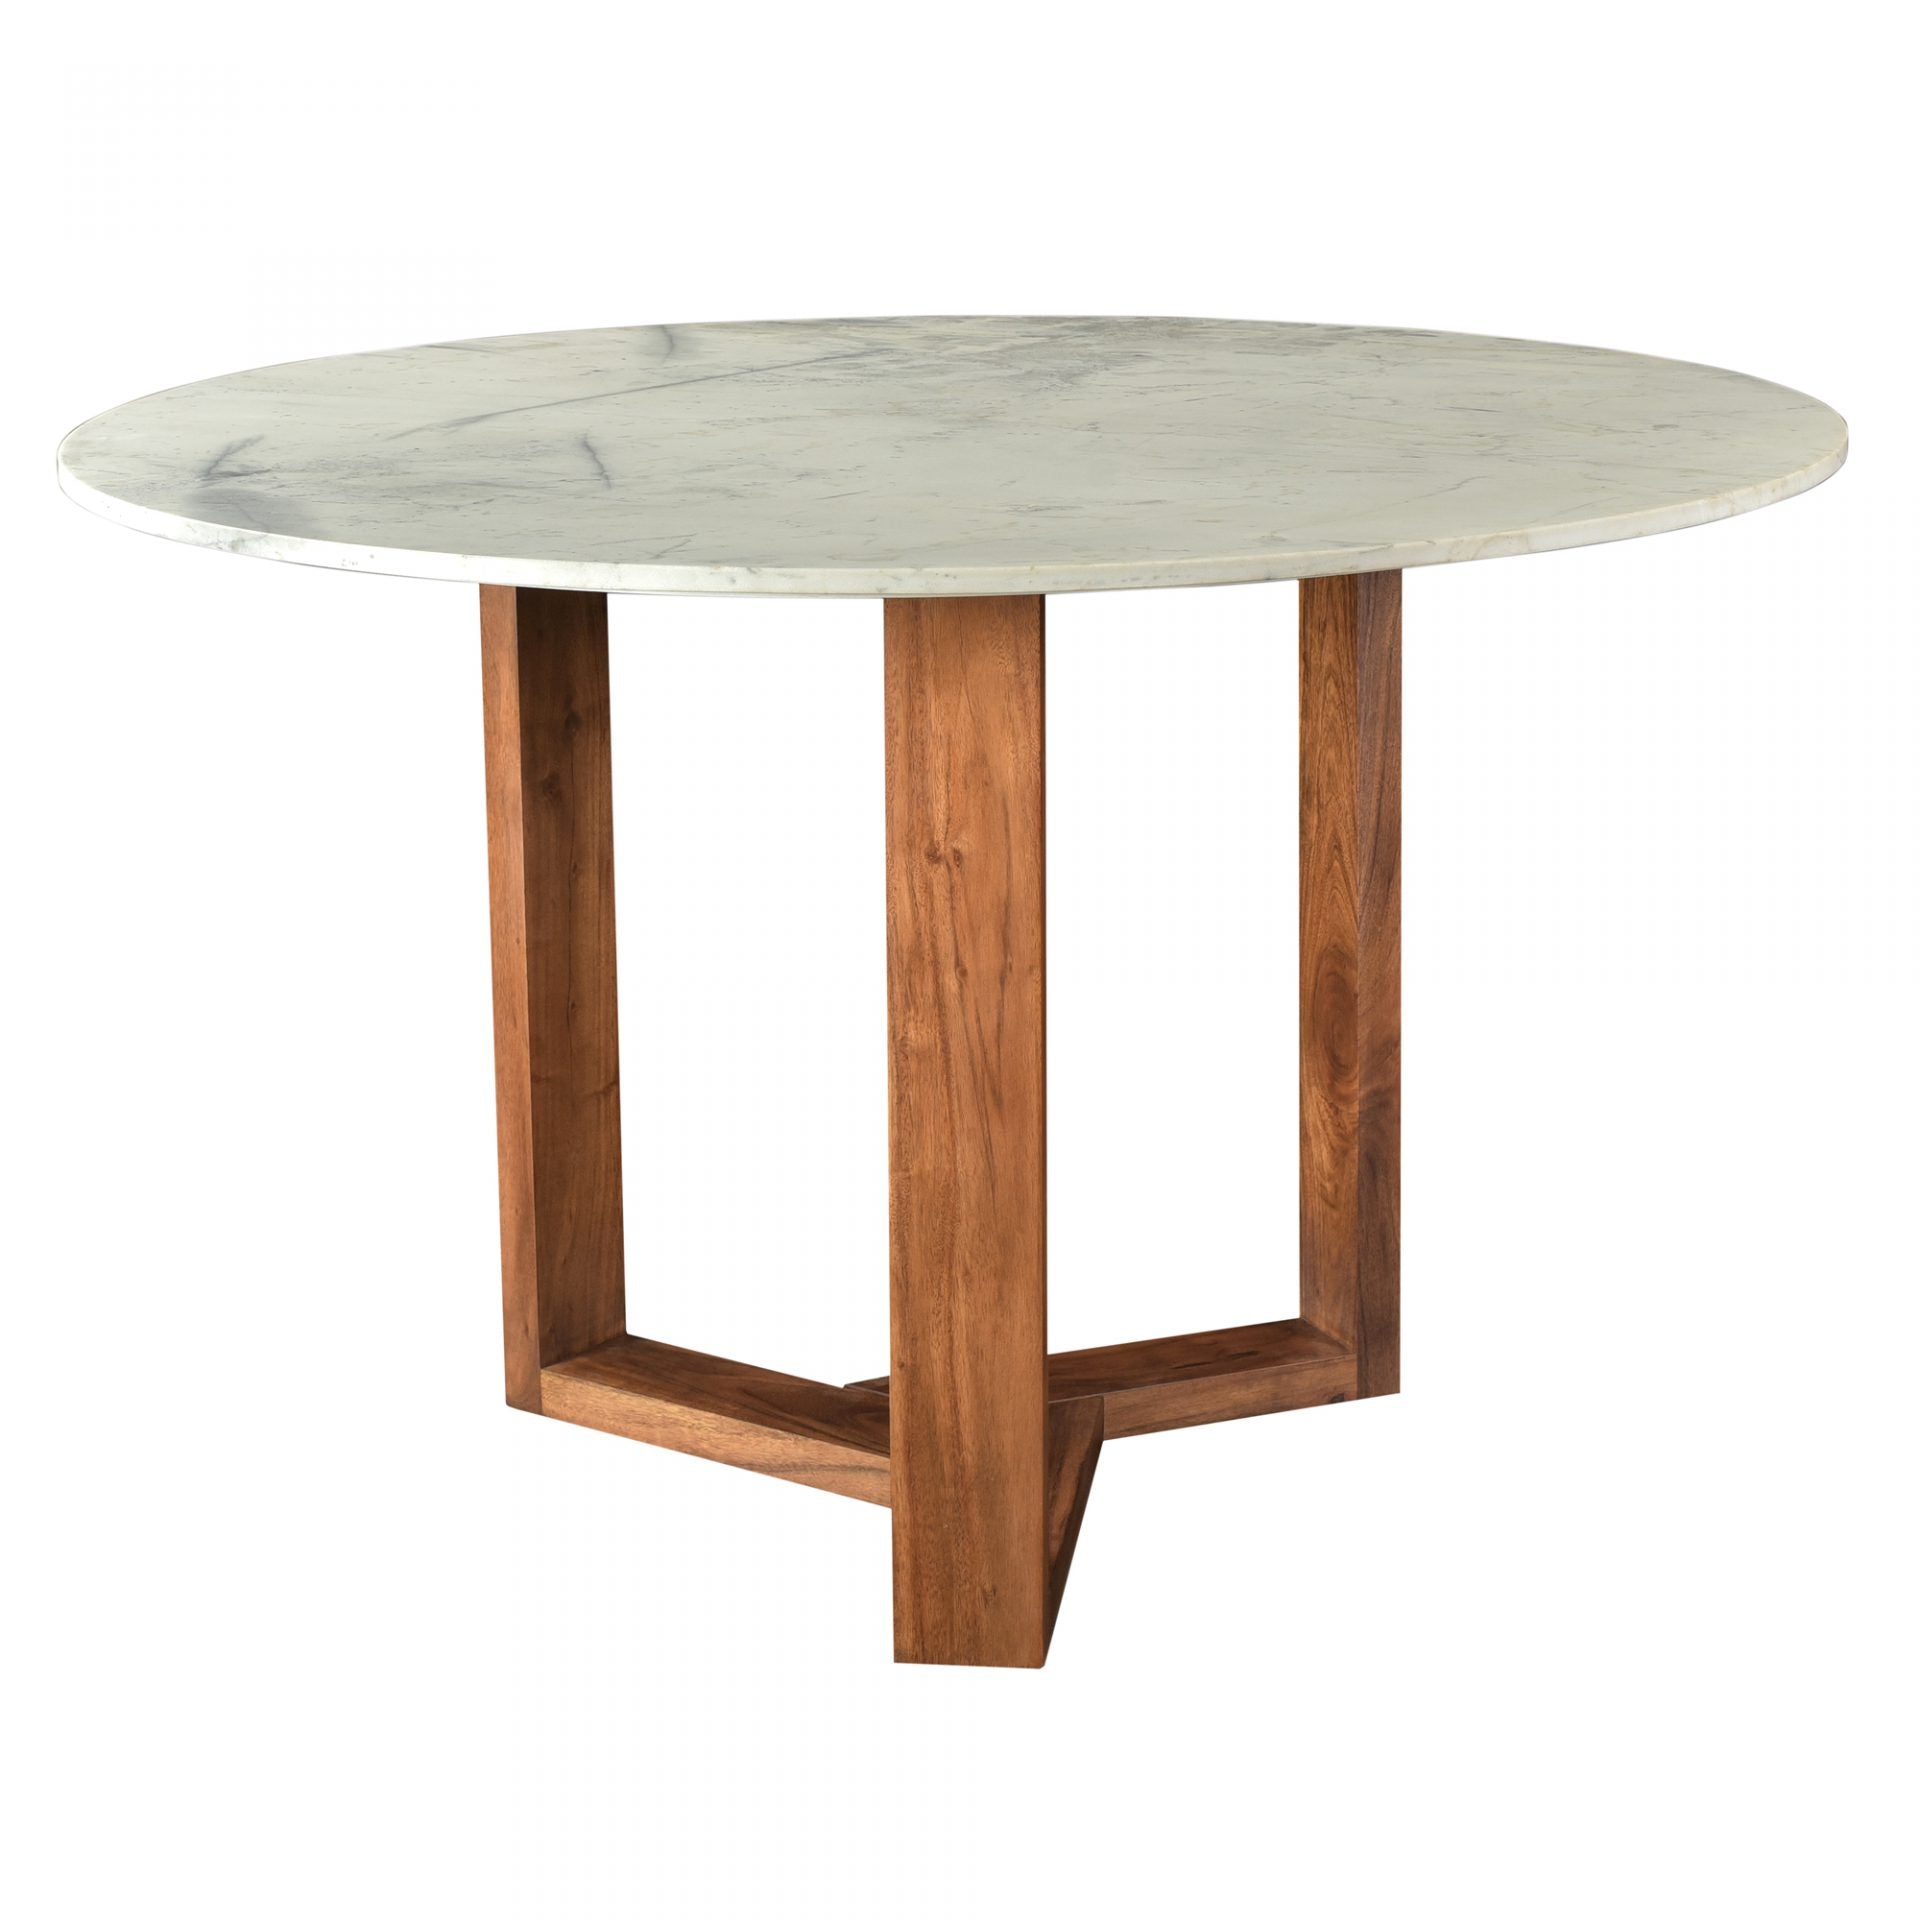 With a solid Satwaria marble tabletop, the Jinxx Dining Table - Brown showcases the best of nature's work. Solid Acacia legs form an ergonomic base that allows 4-6 people to sit comfortably around the table.  Size: 48"W x 48"D x 30"H Materials: White Satwaria Marble Top, Solia Acacia Base, MDF